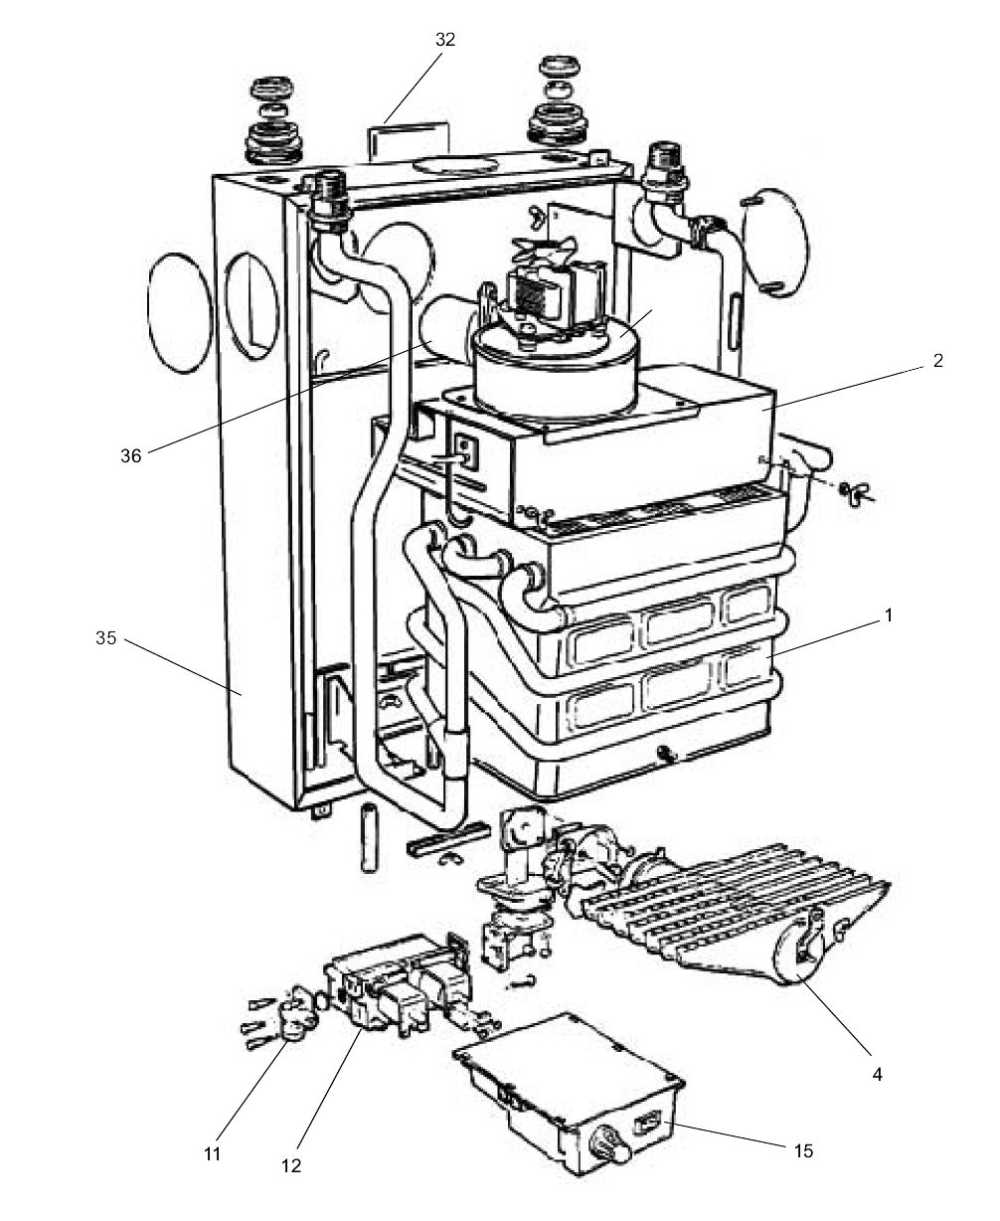 A48/C - Boiler Expanded